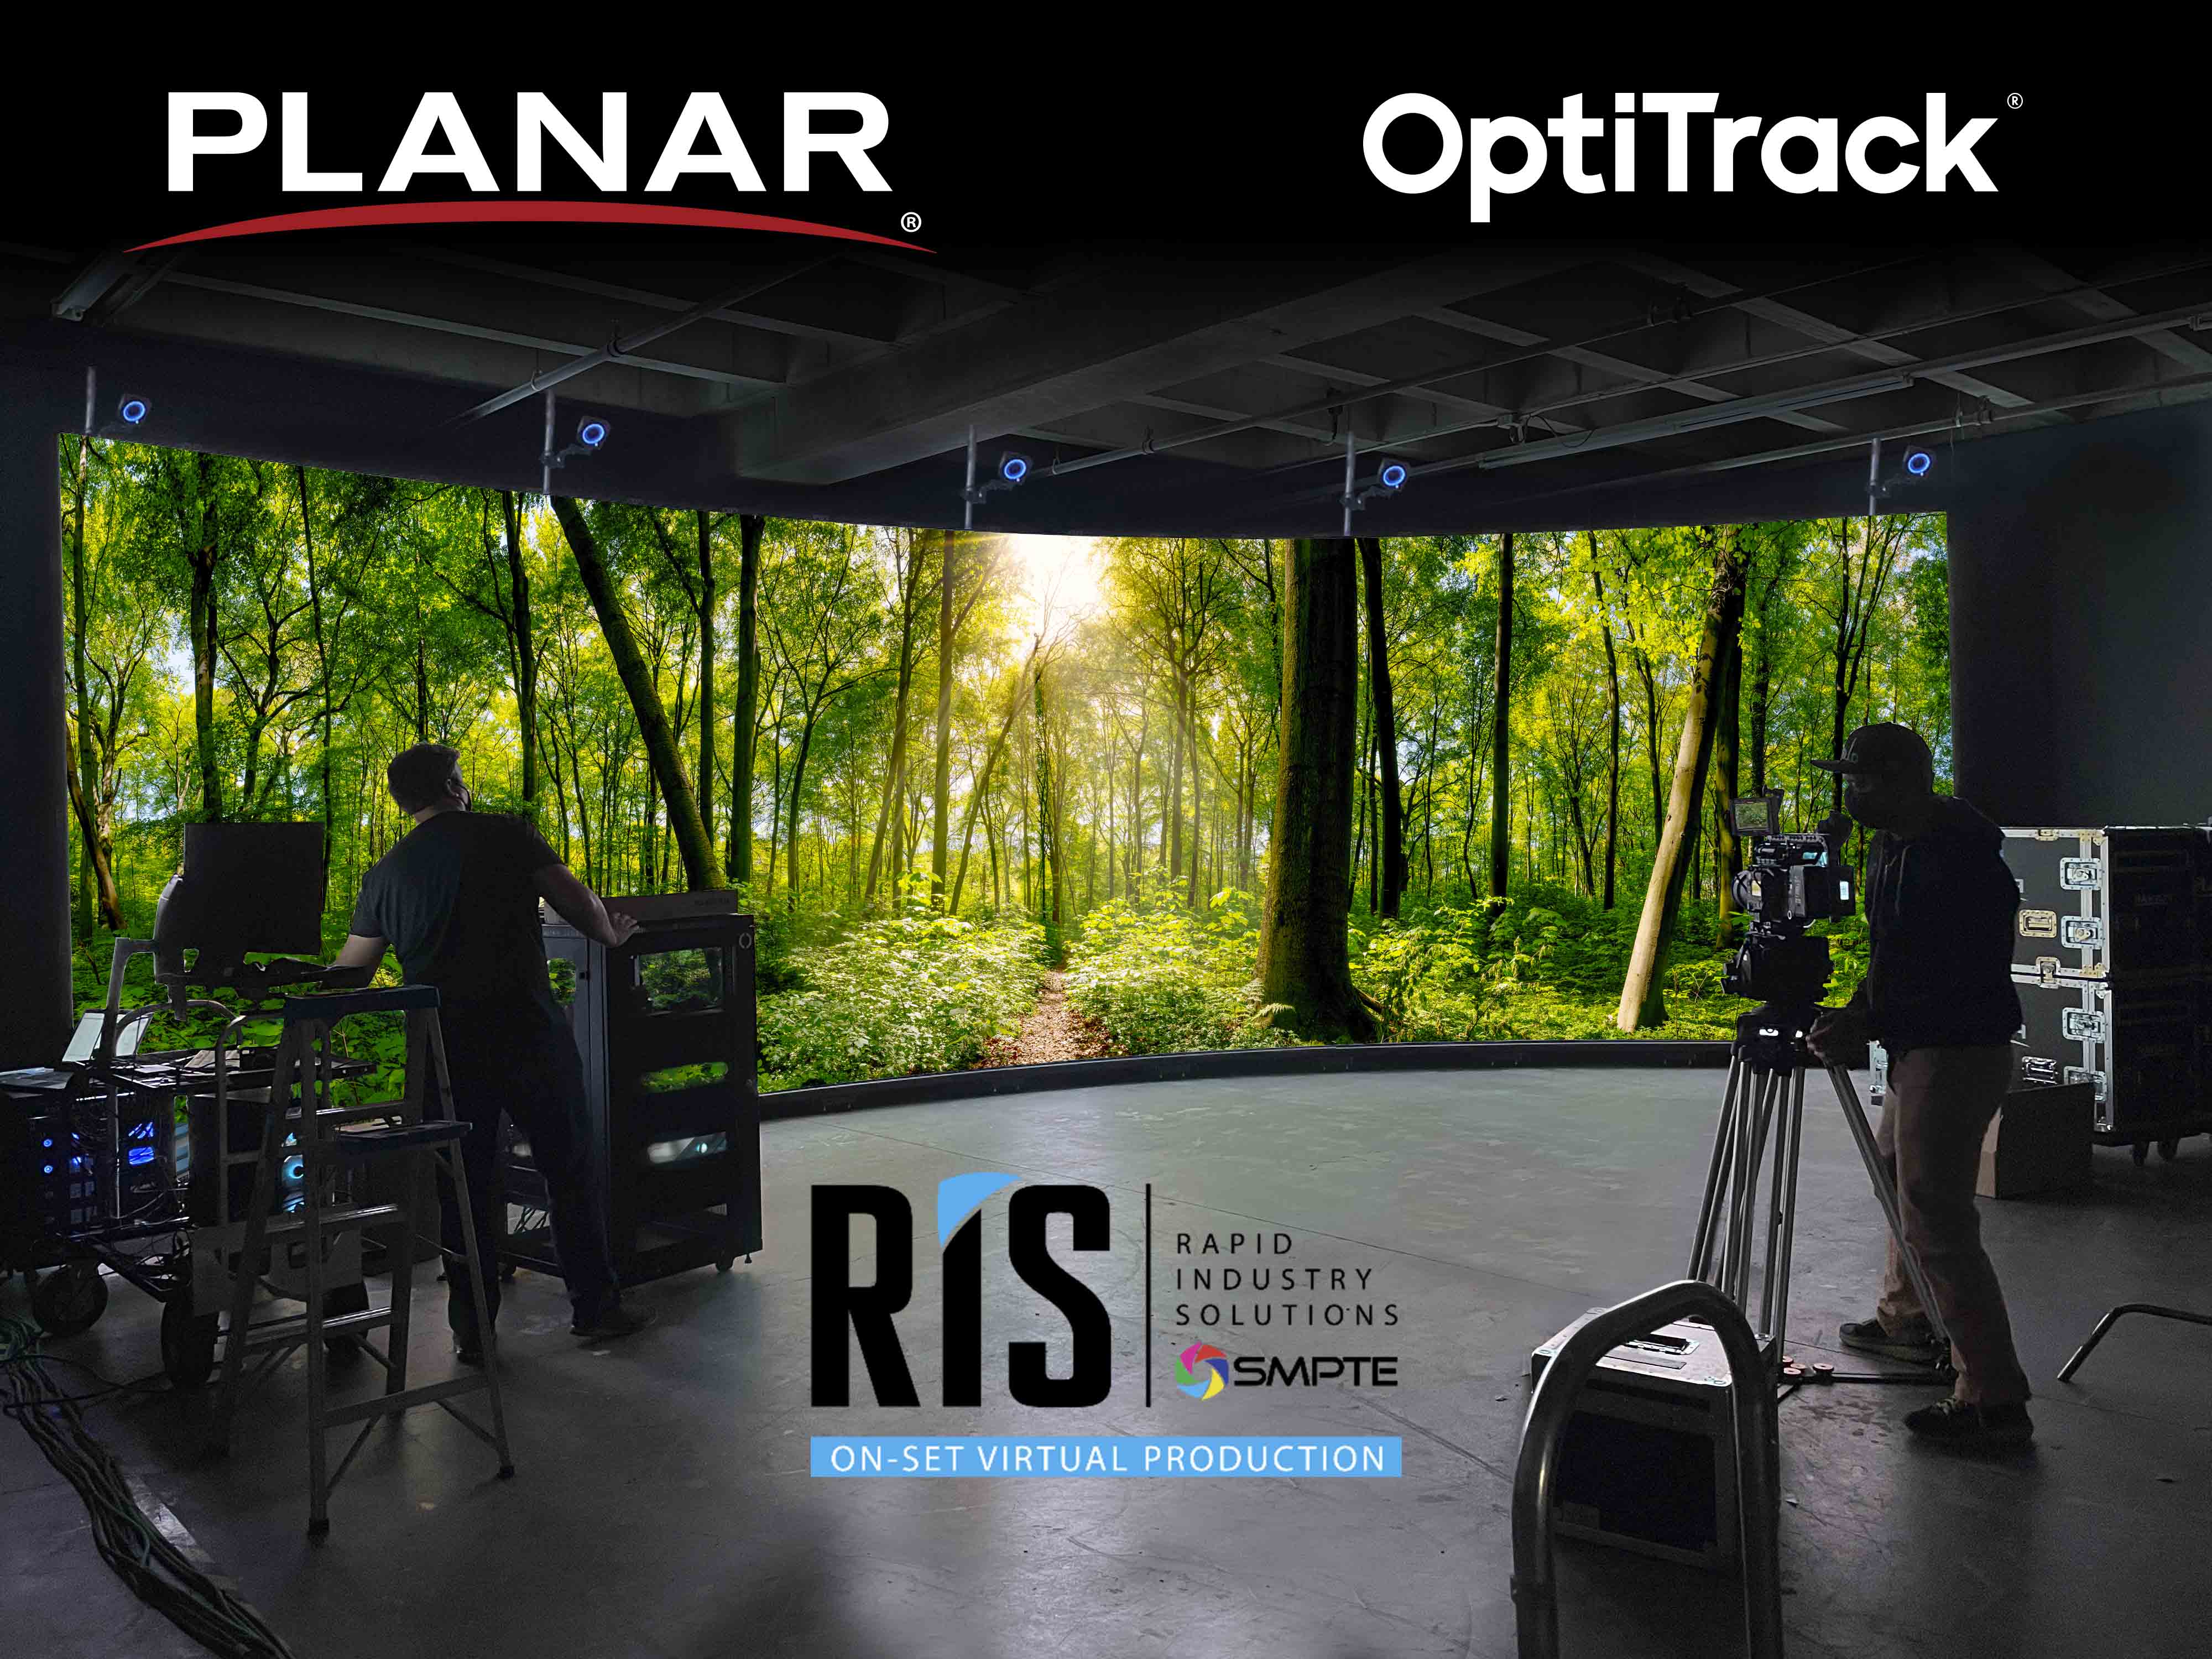 Planar and OptiTrack Partner with SMPTE and Other Industry Leaders to Develop On-Set Virtual Production Methodologies